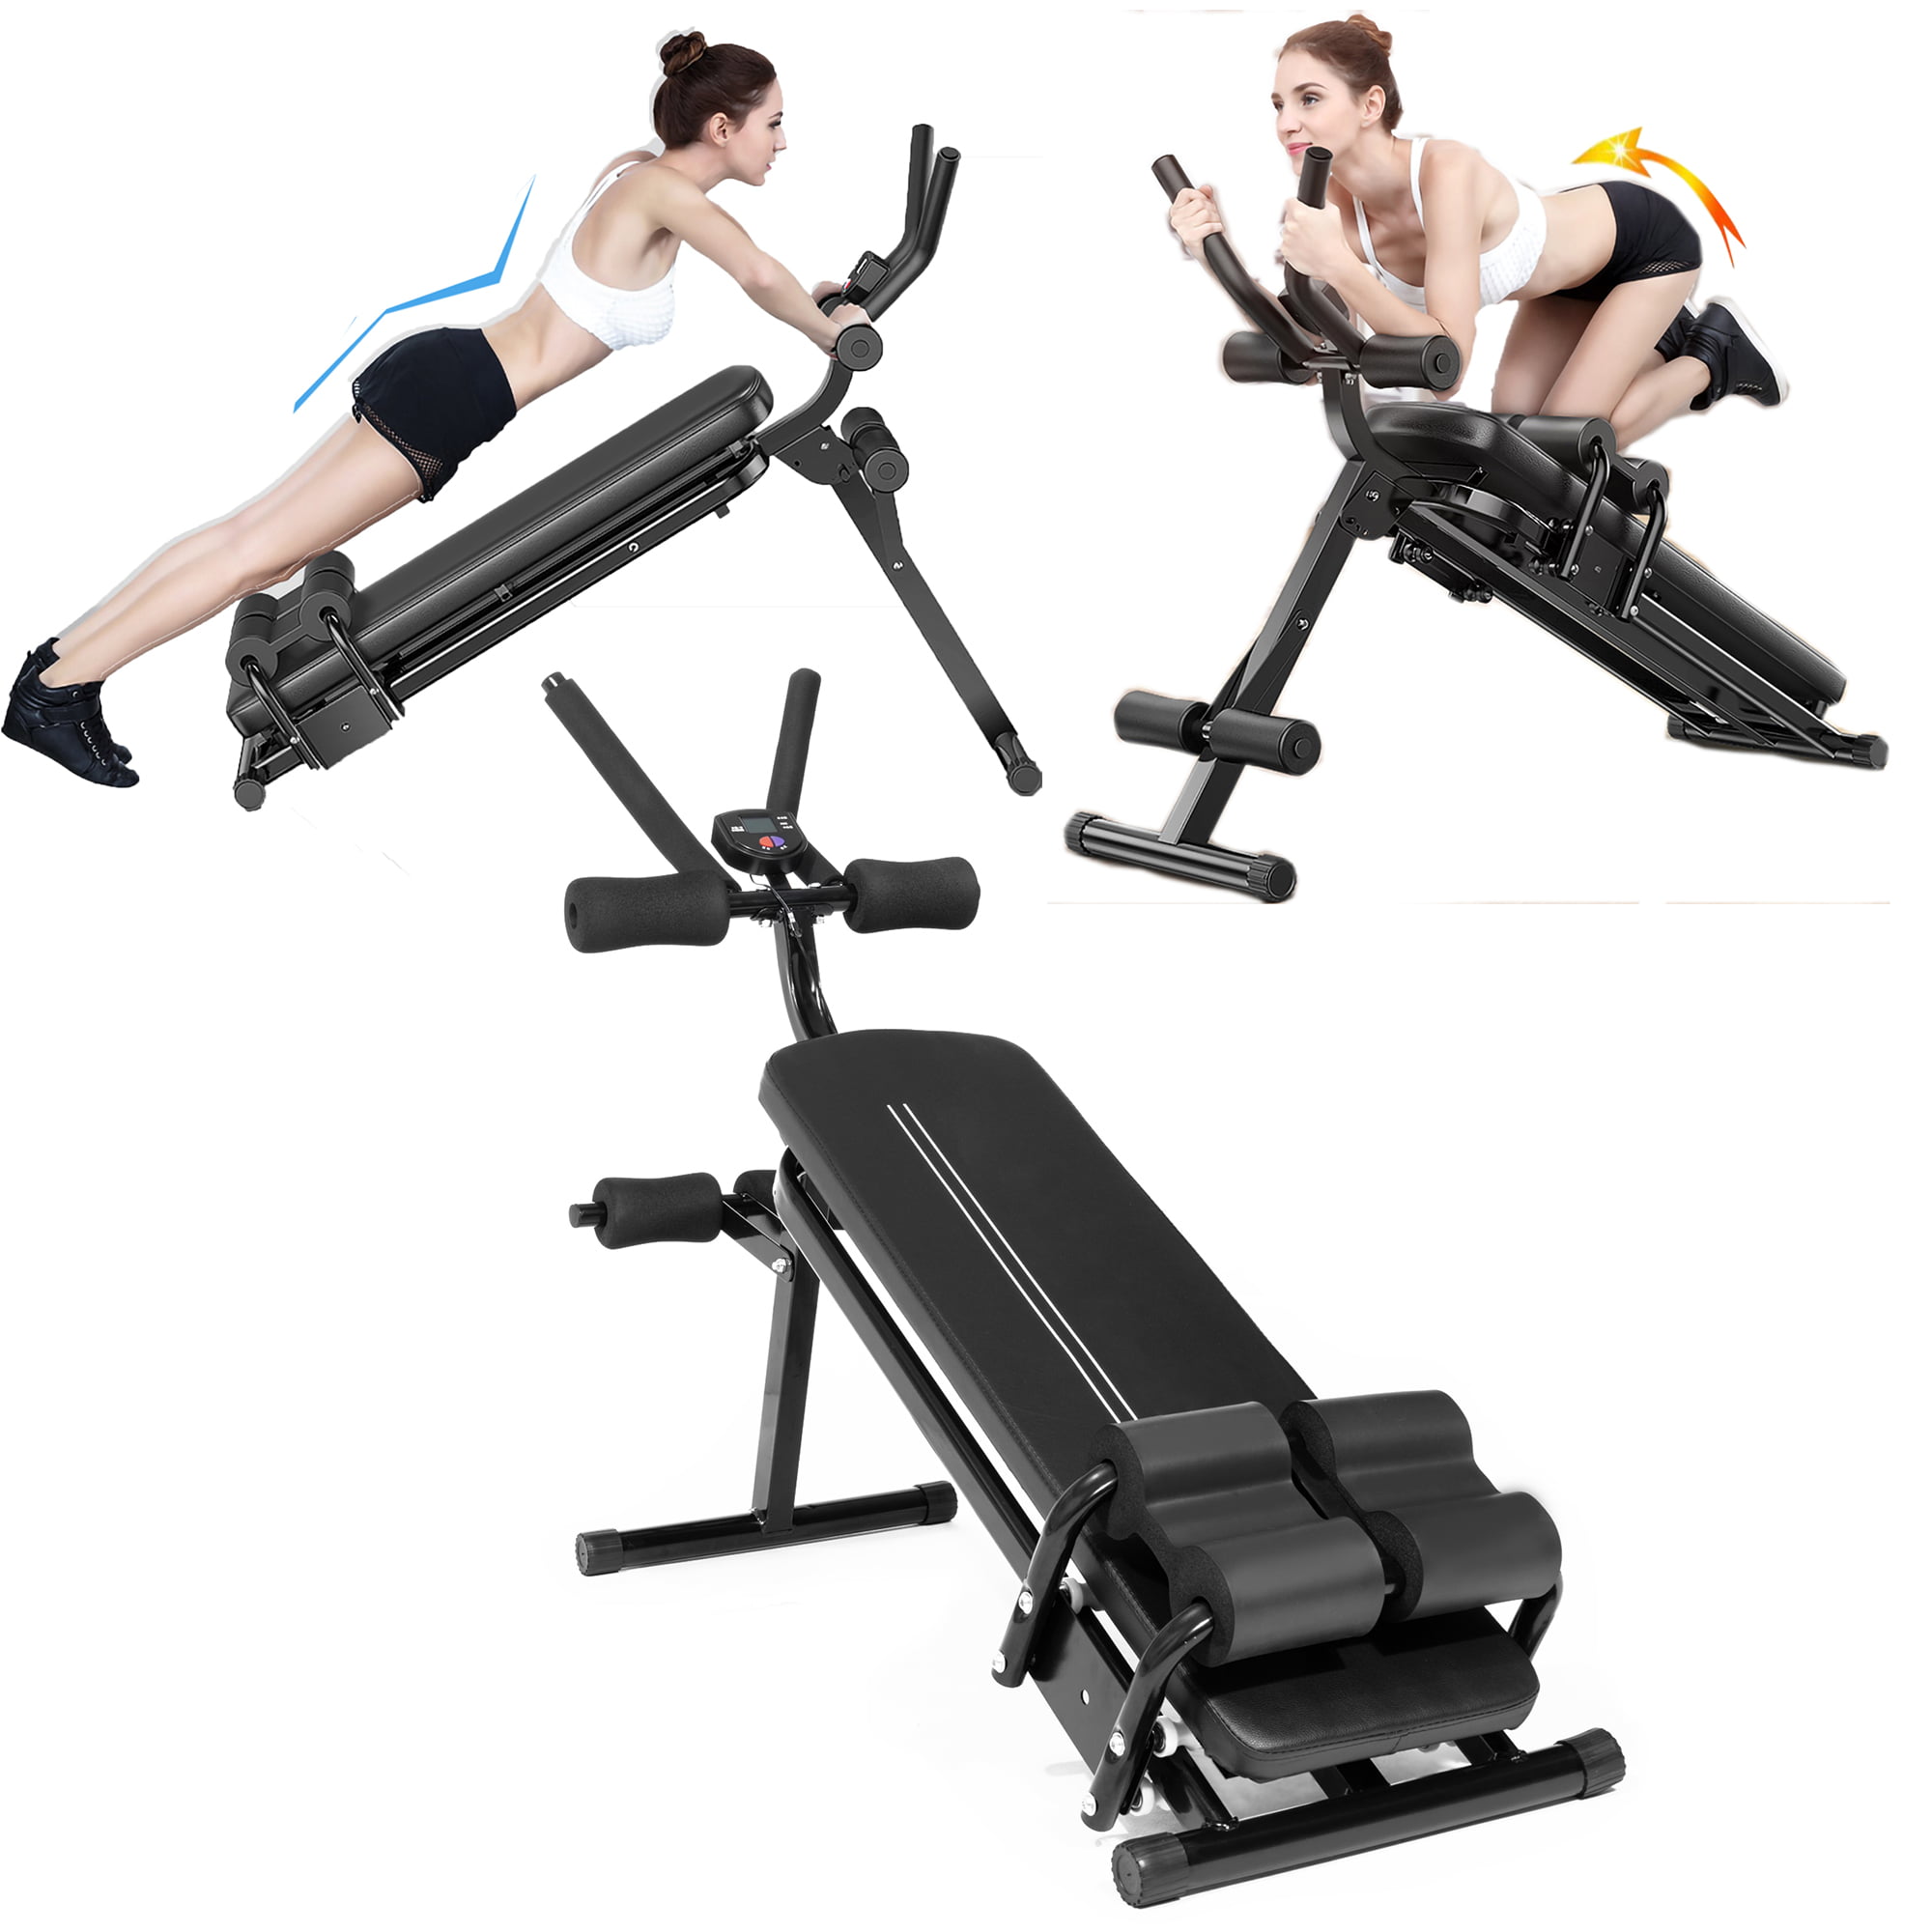 Details about   Sit Up Bench Decline Ab Abdominal Fitness Home Gym Exercise Workout Ab Traning 